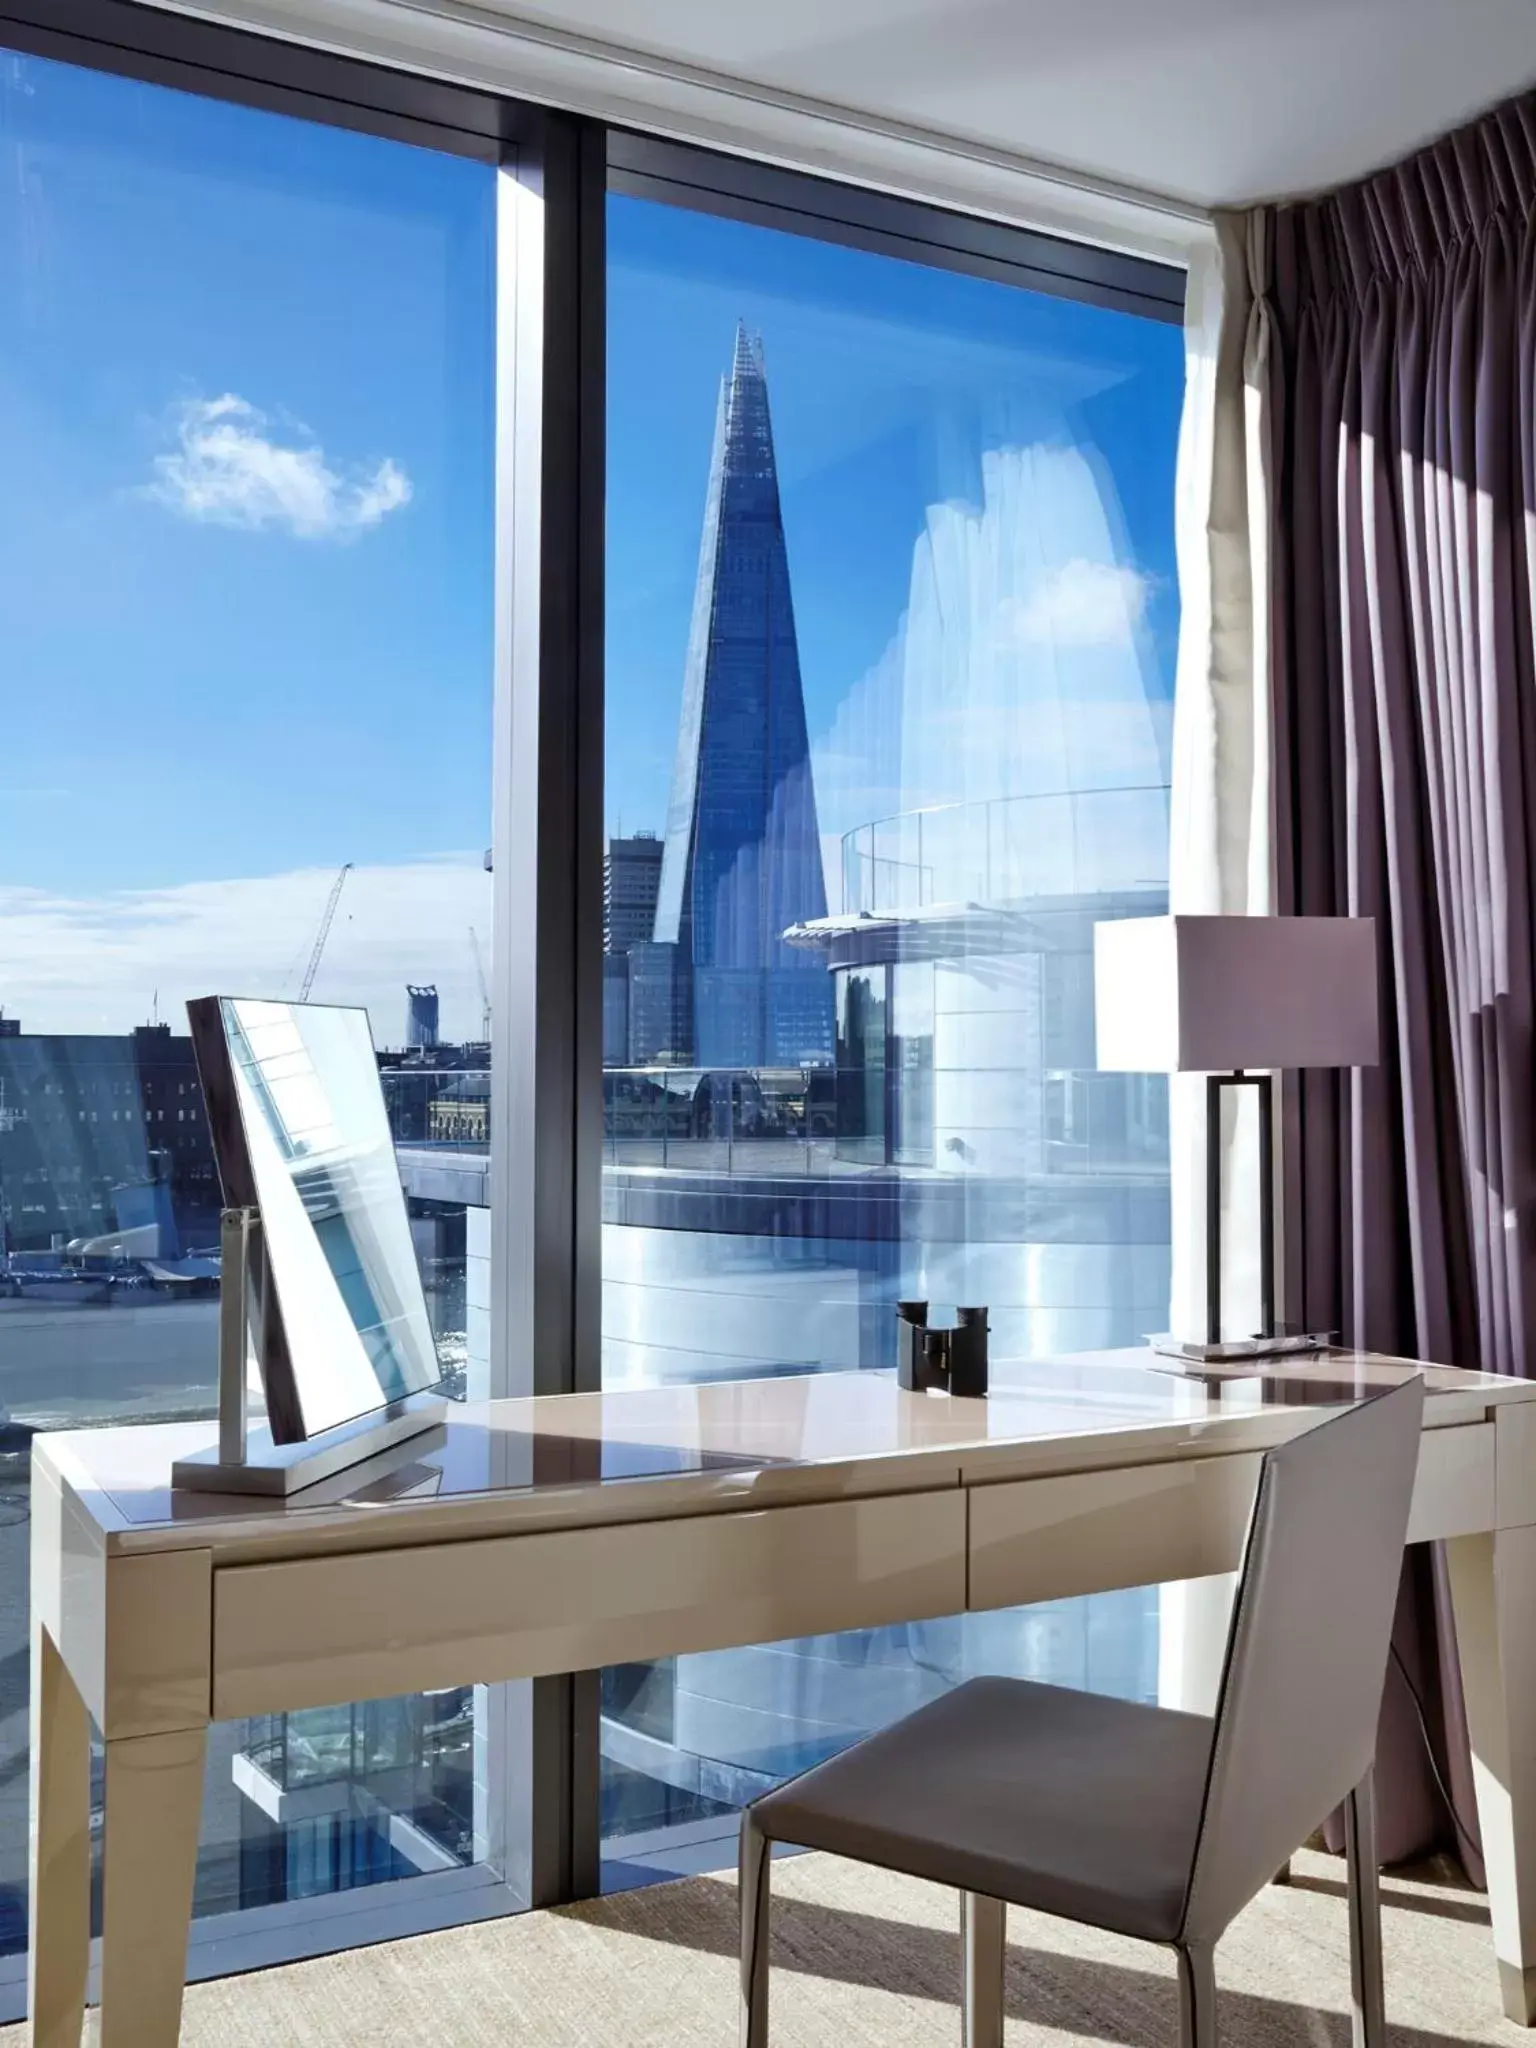 Two-Bedroom Apartment with River View in Cheval Three Quays at The Tower of London